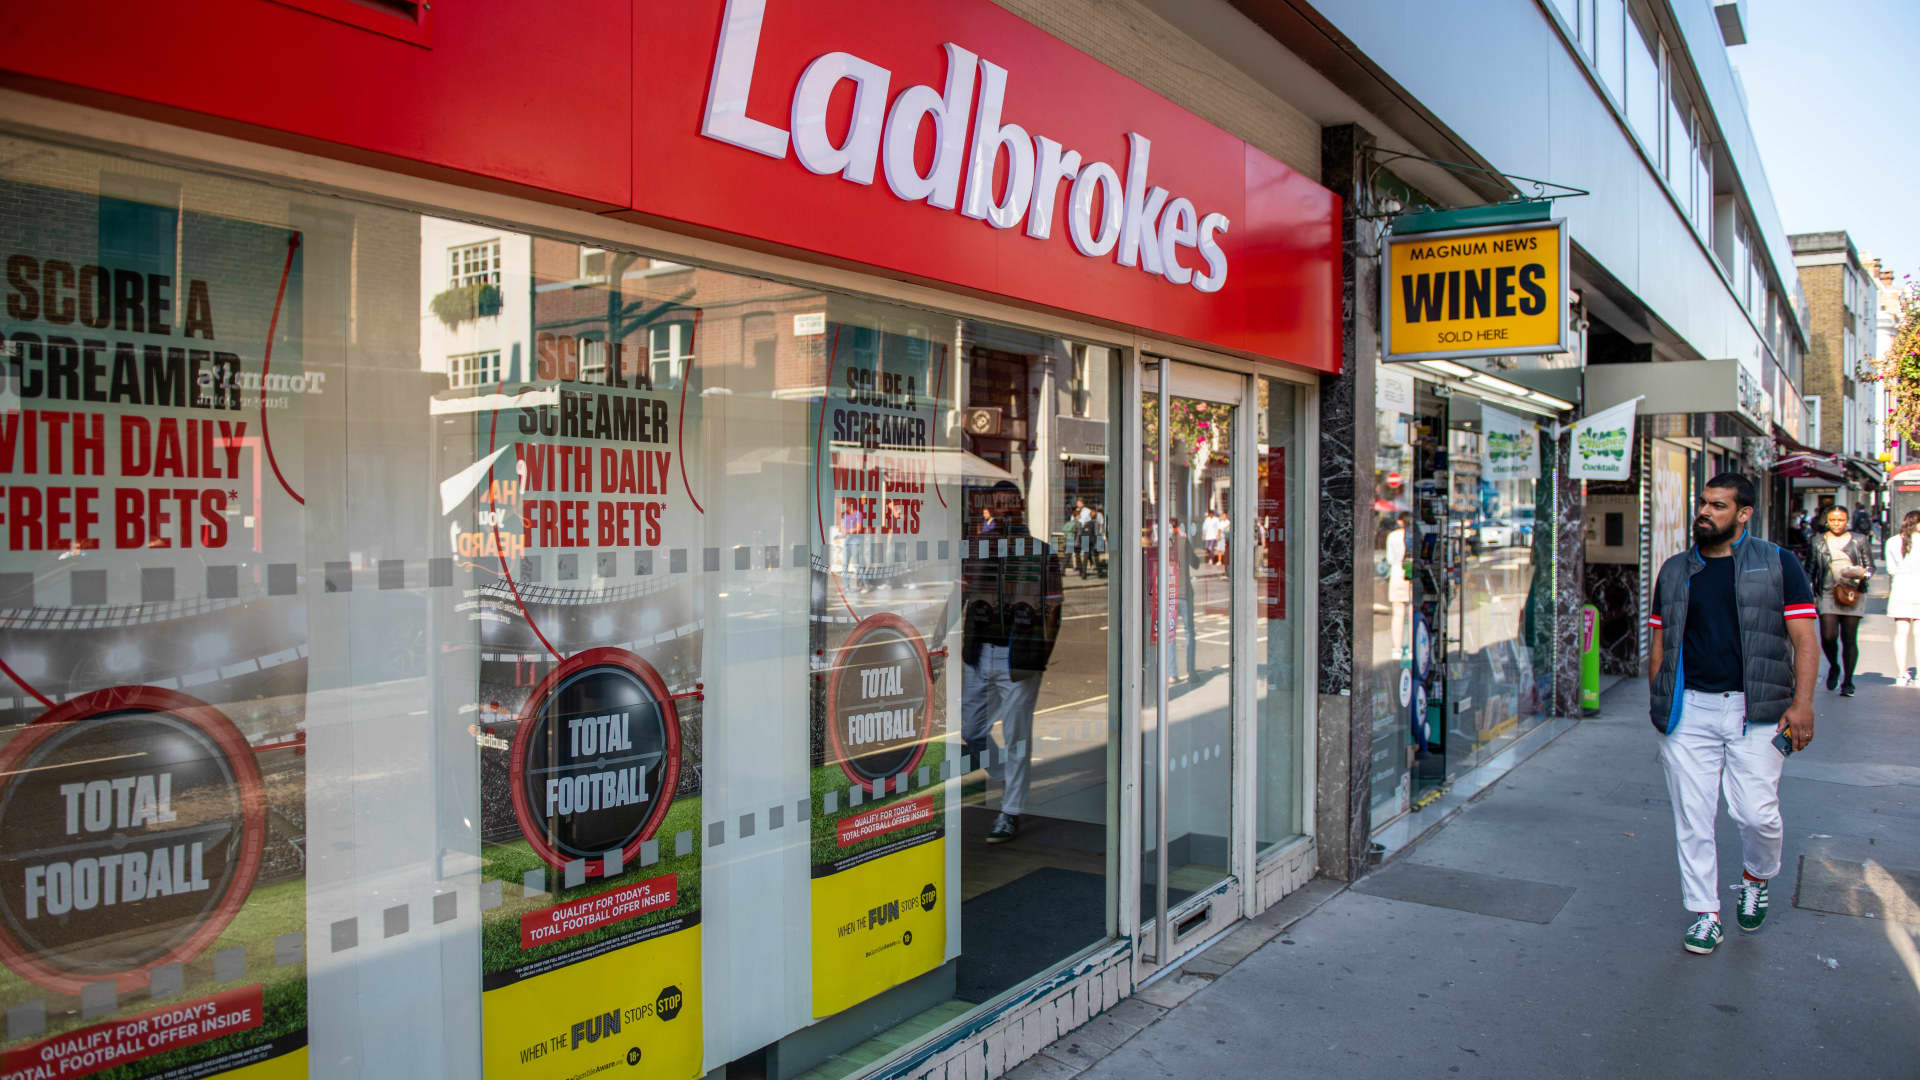 A Ladbrokes betting shop, operated by Entain Plc, in London, U.K., on Wednesday, Sept. 22, 2021.